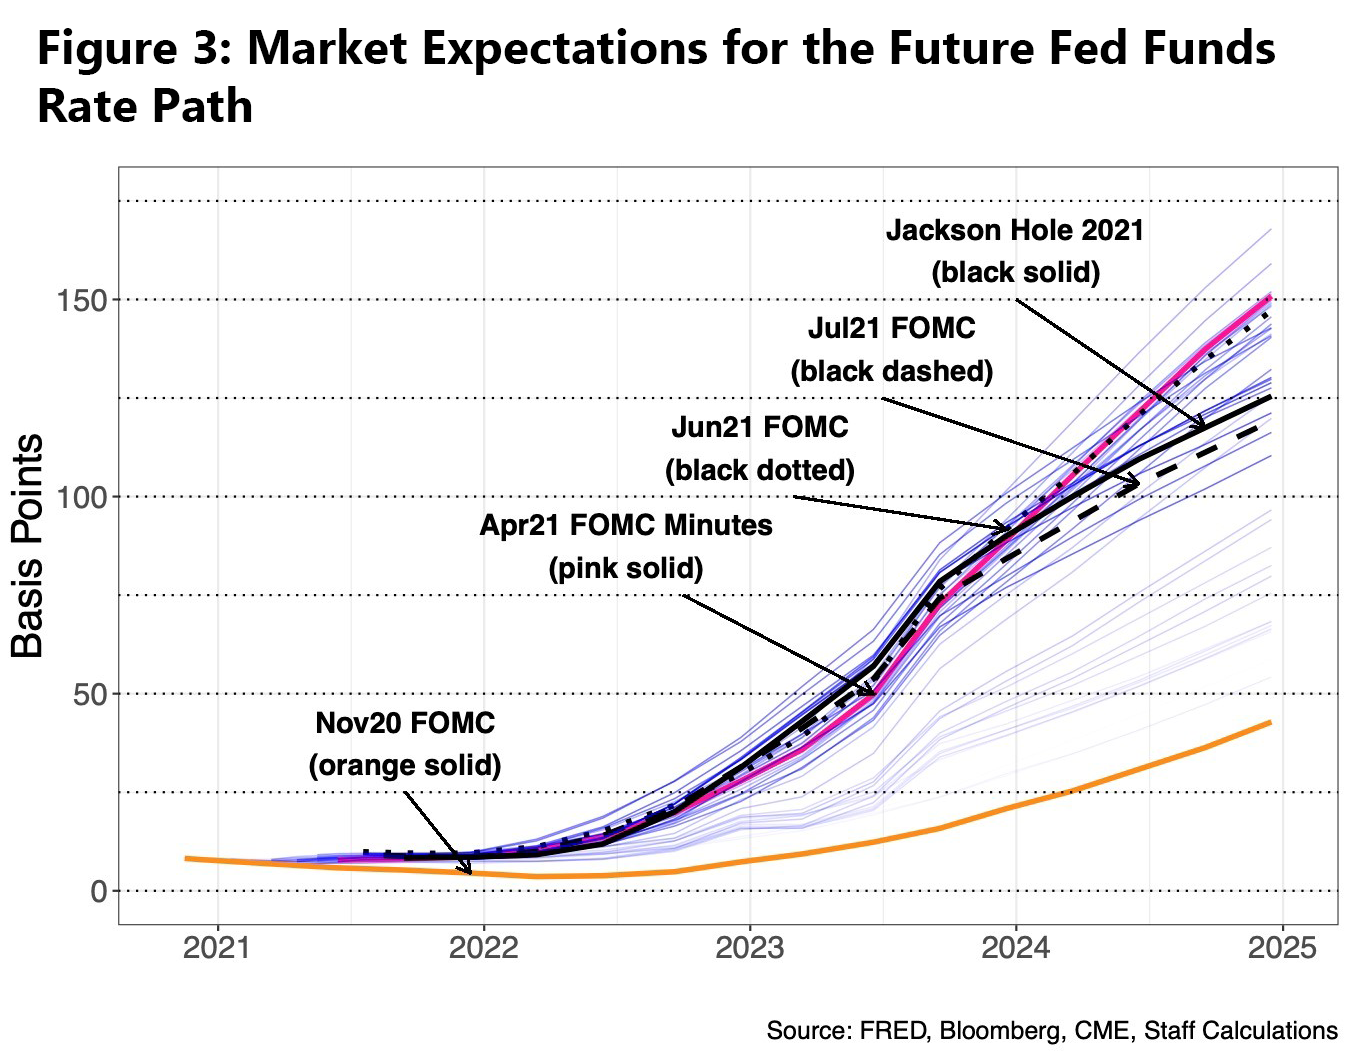 Figure 3: Market Expectations for the Future Fed Funds Rate Path